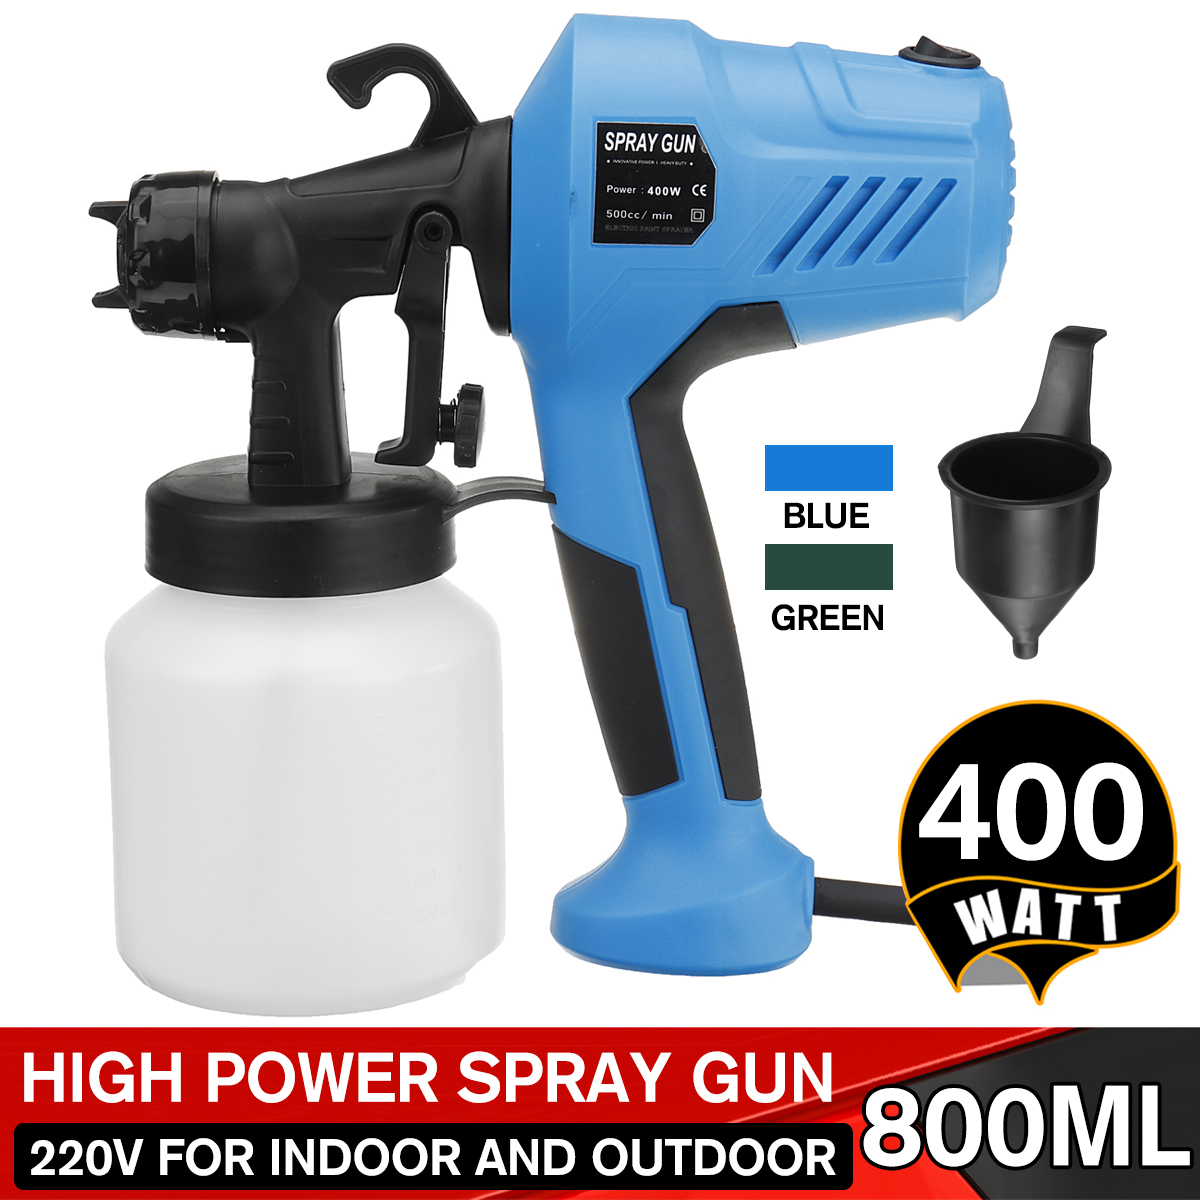 800ml-220V-400W-High-Power-Electric-Machine-Paint-Sprayer-Painting-Fogger-Sprayer-Tool-For-Indoor-An-1716537-4